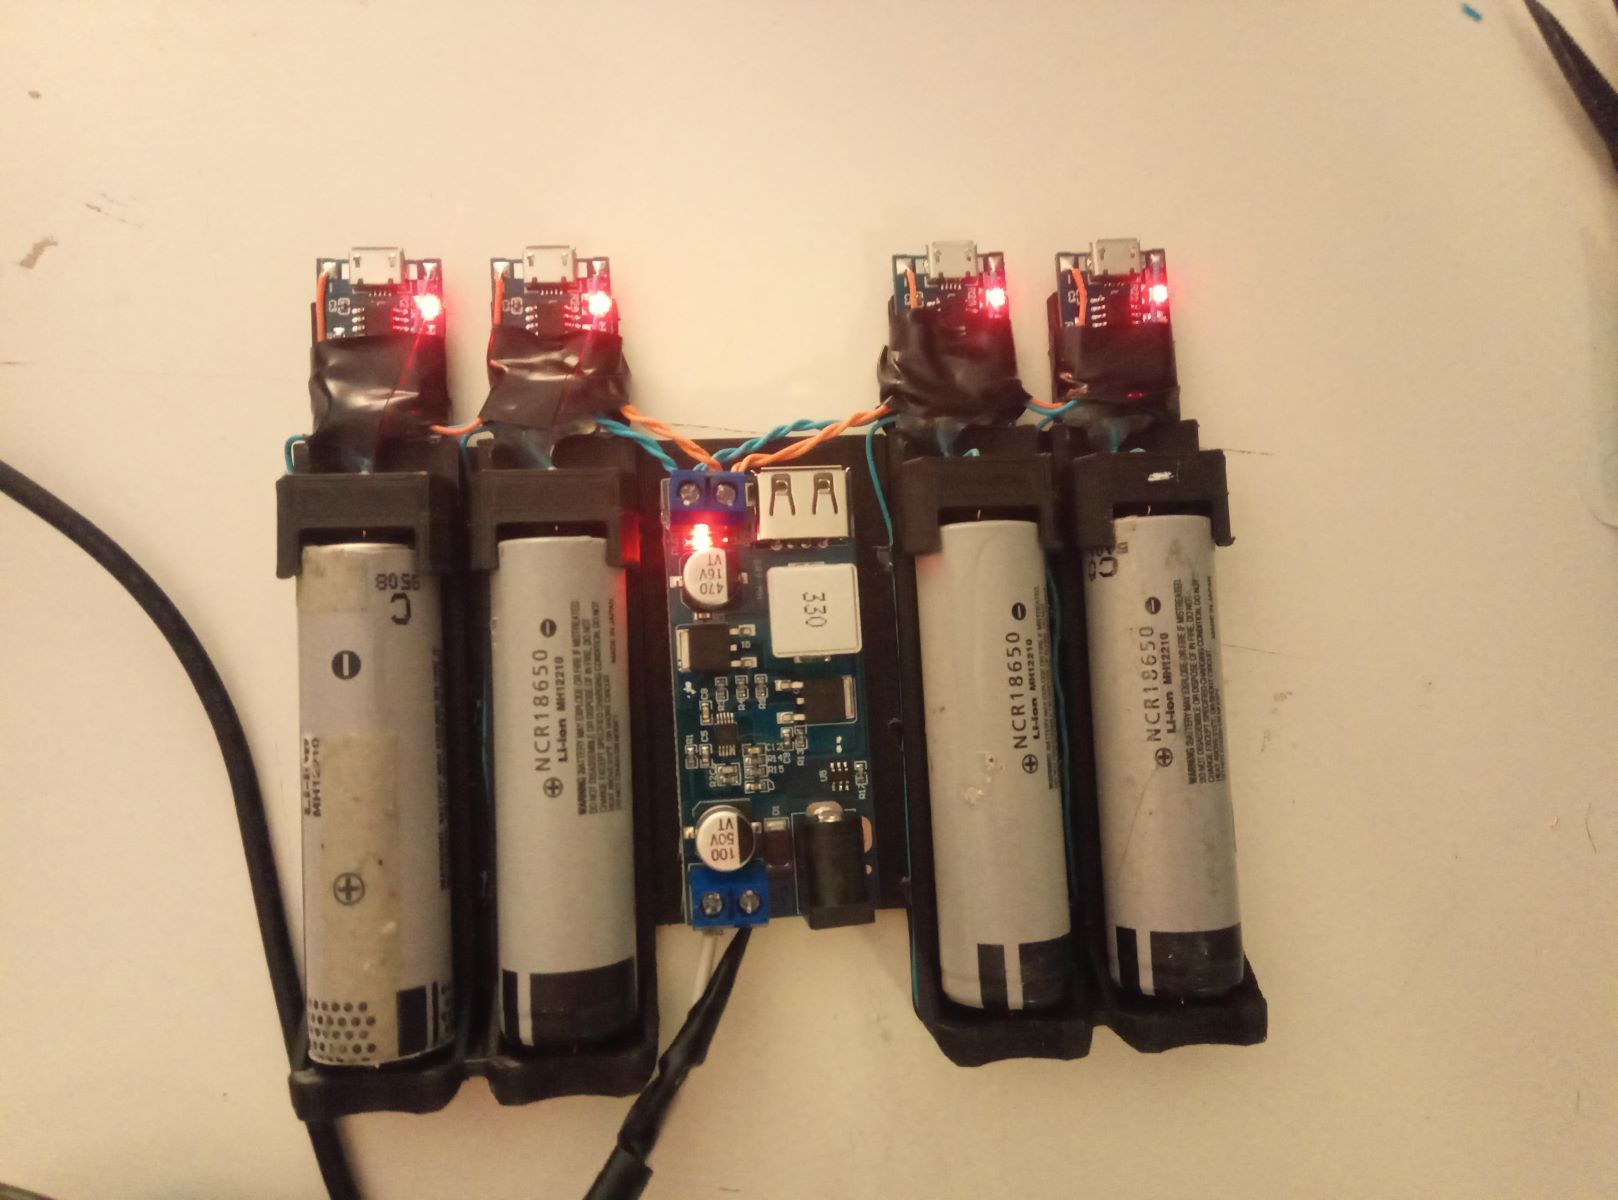 DIY Charger: Making Your Own Battery Charger